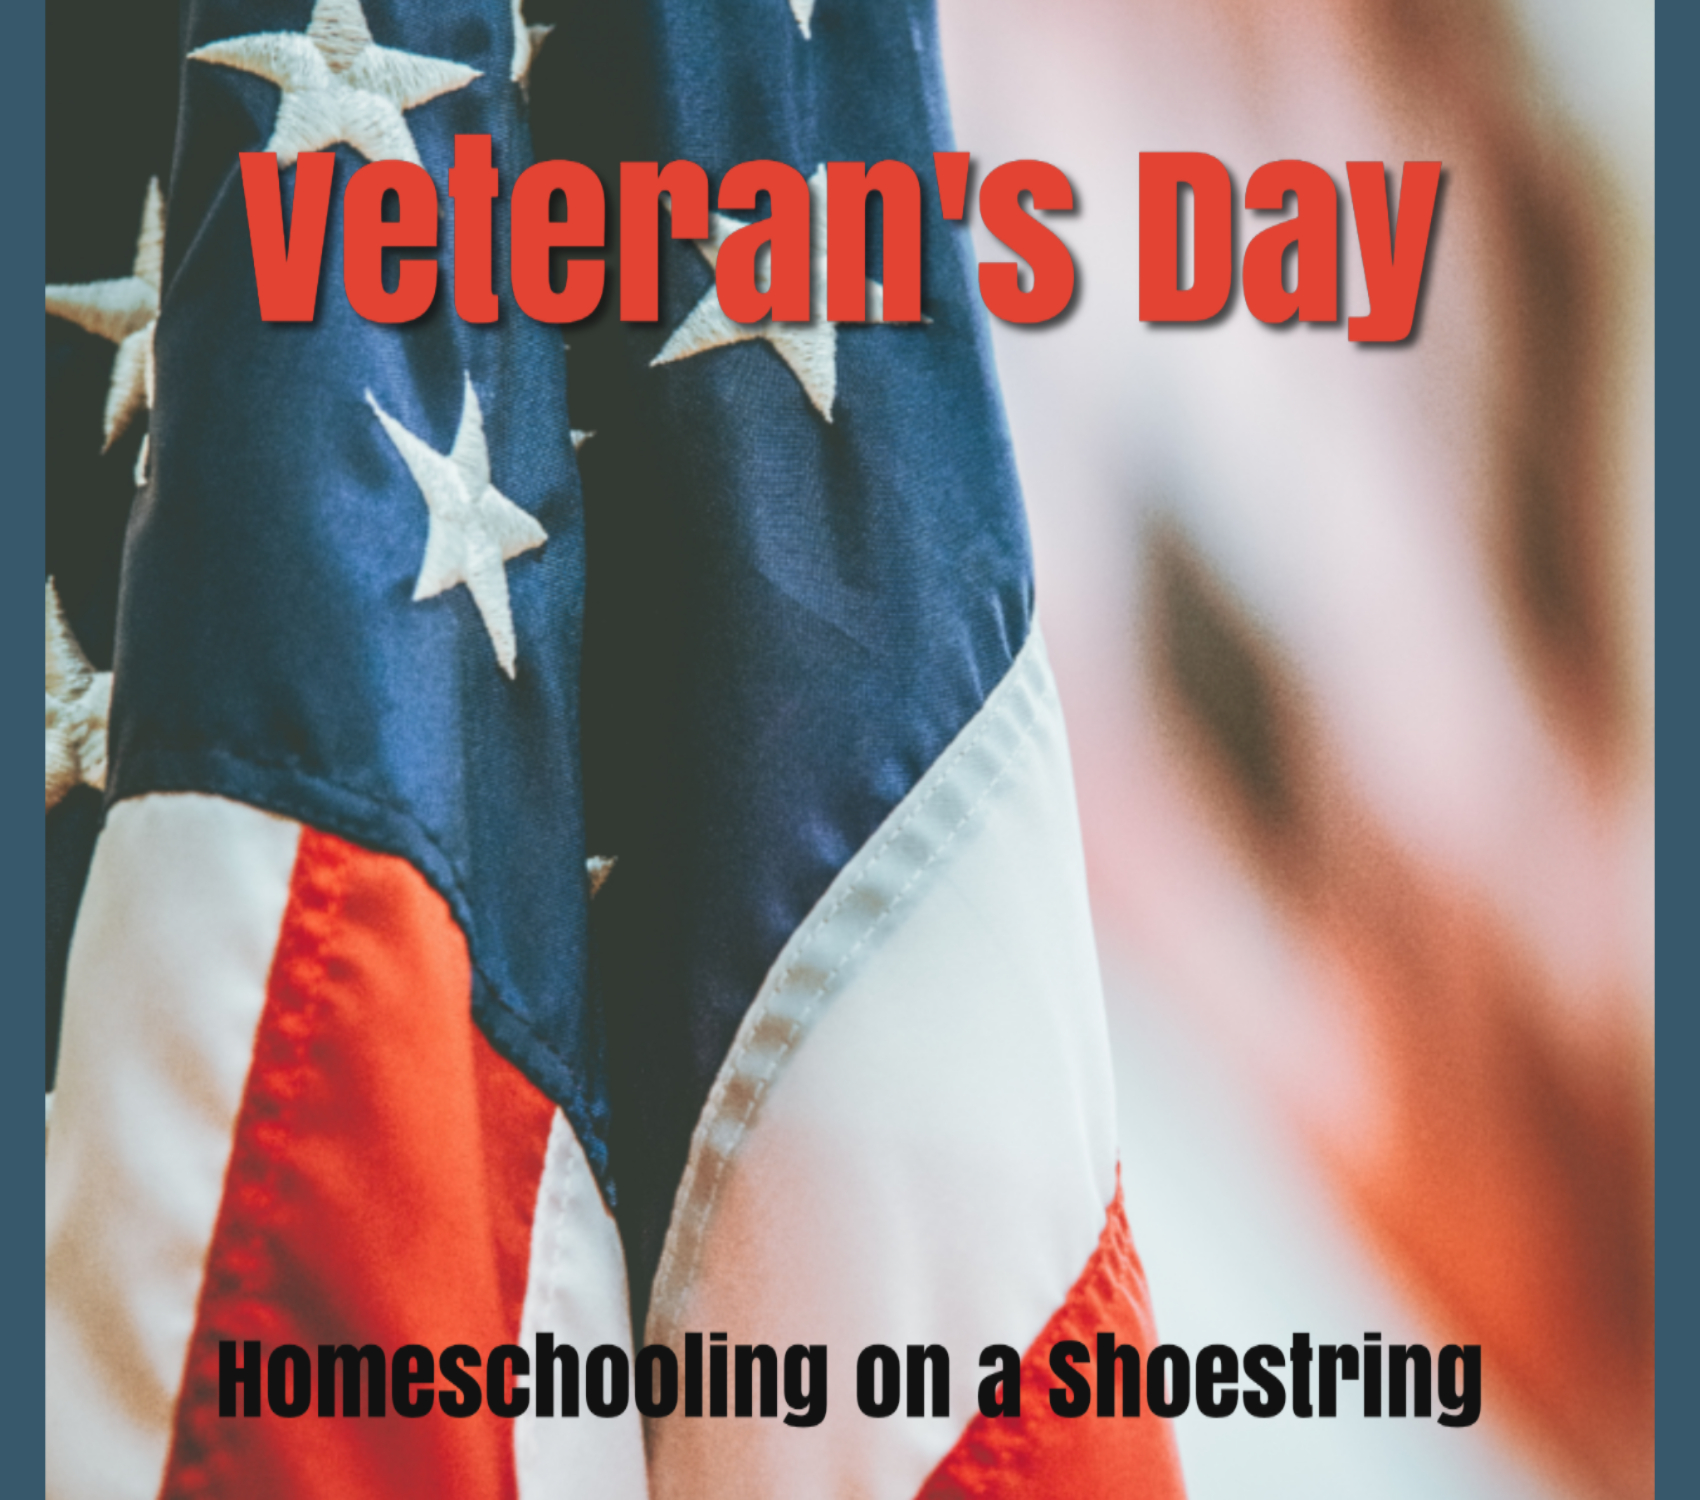 Veteran's Day Homeschooling on a Shoestring